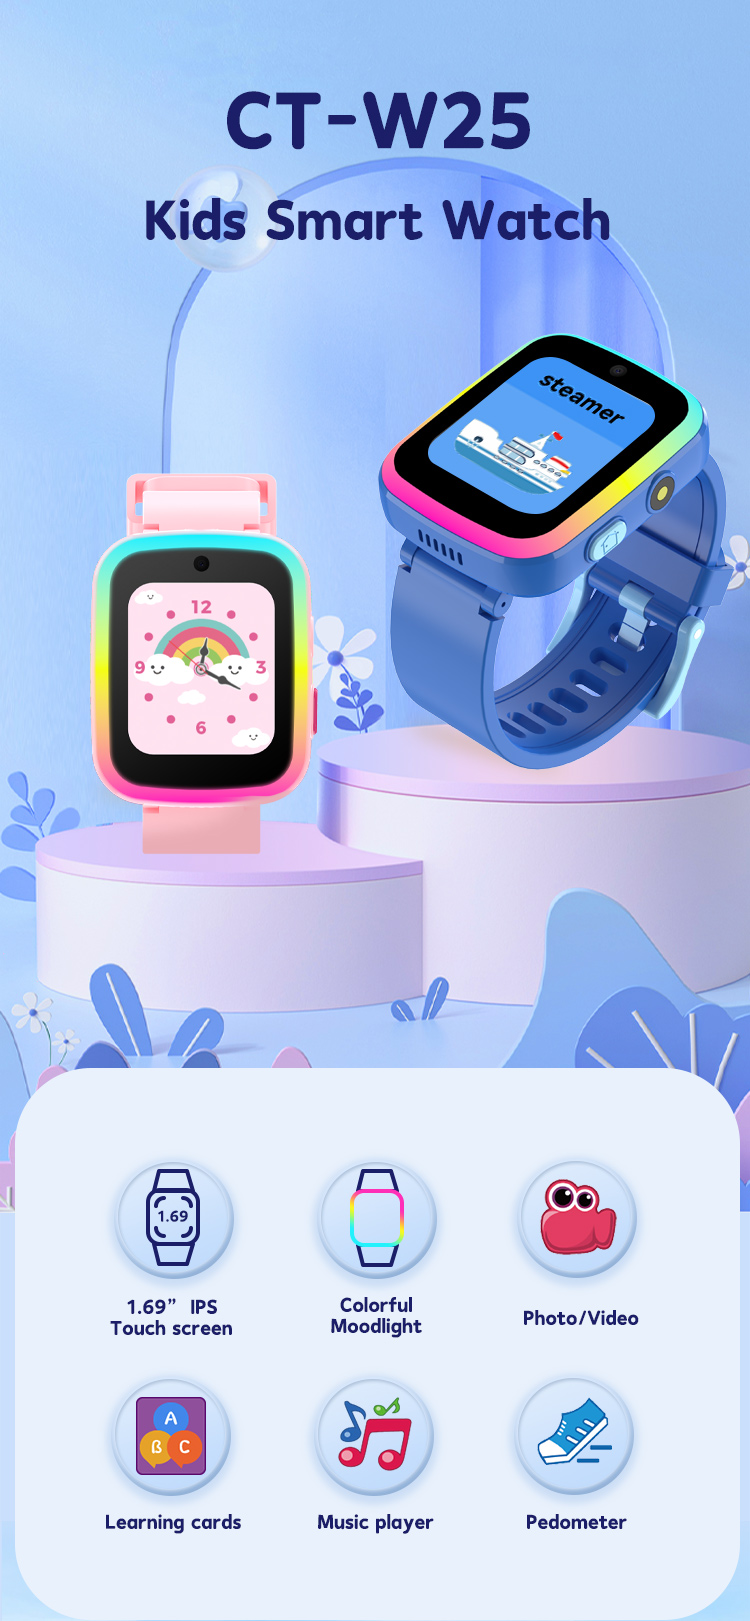 kids smart watch CT-W25 With Colorful Mood Lights Details Pictures 1